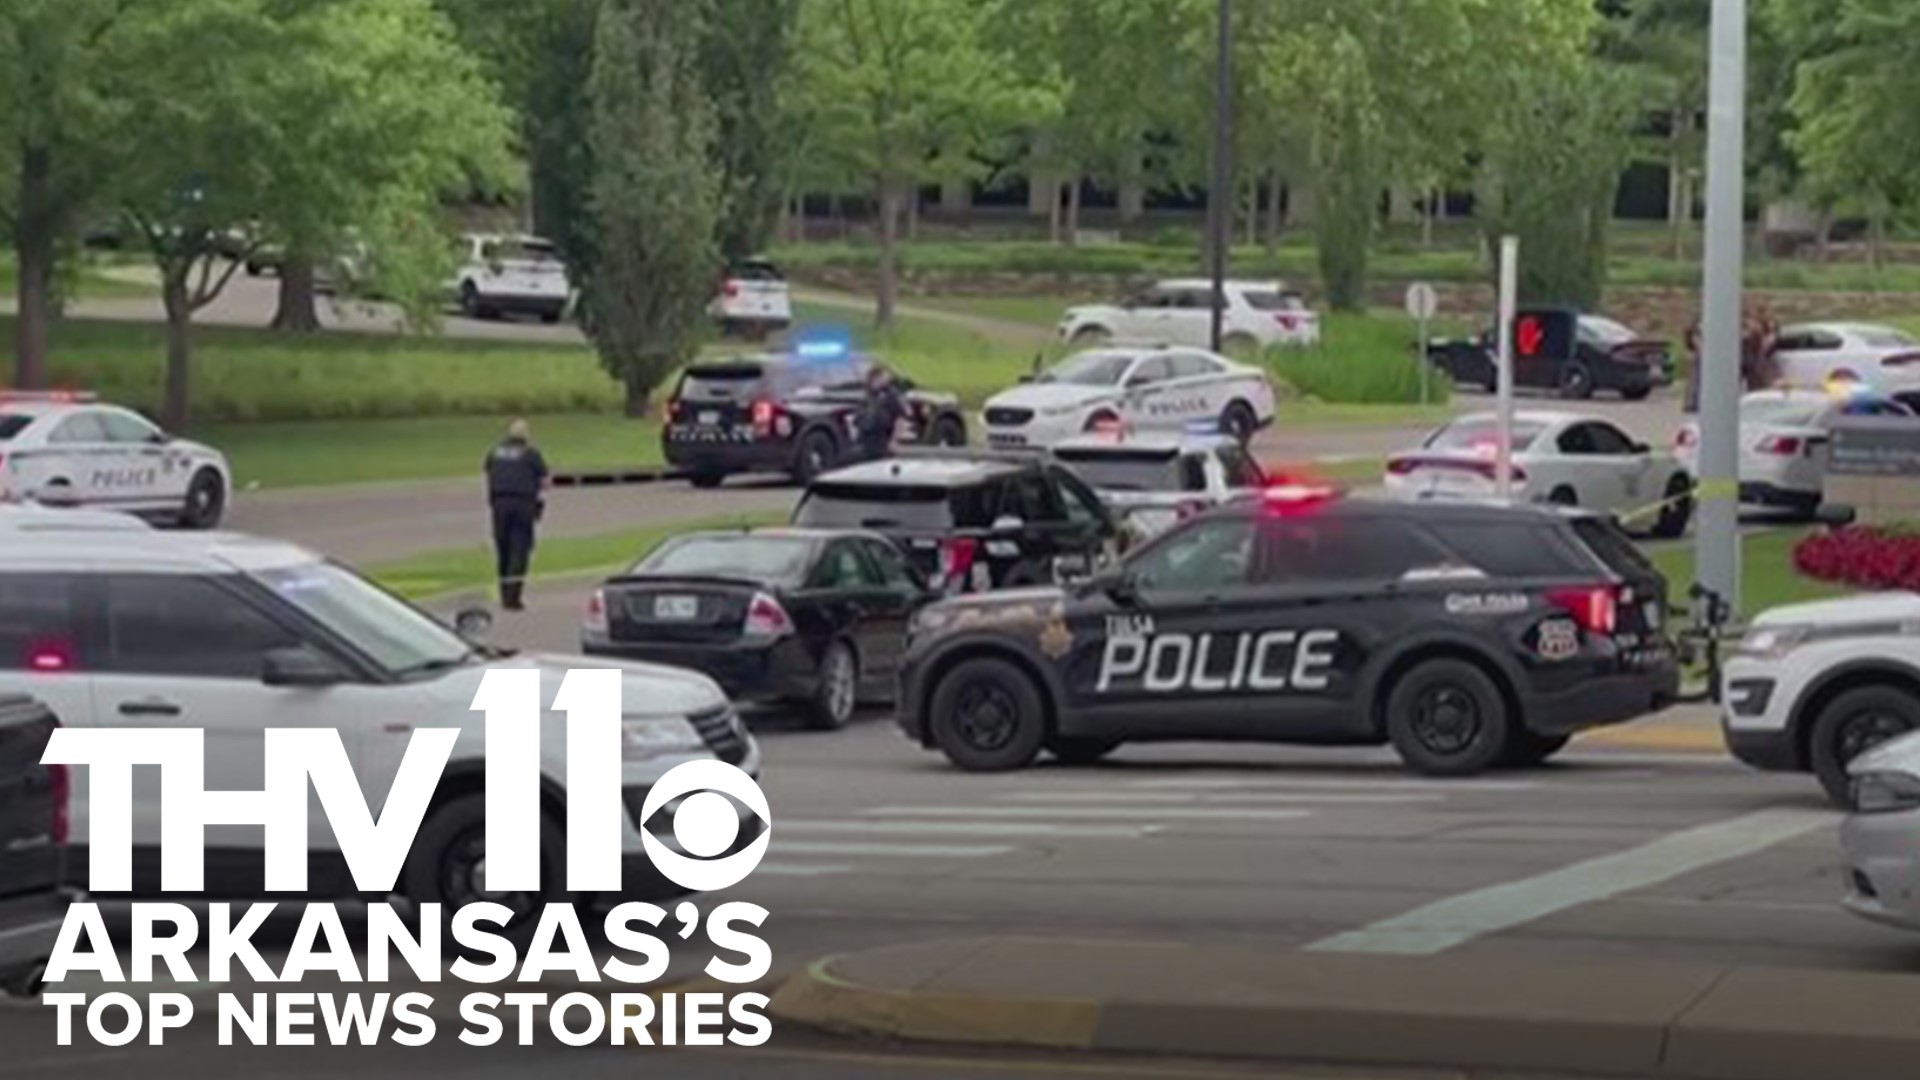 Mackailyn Johnson brings you the latest news for June 2, 2022 including the deadly mass shooting at a medical clinic in Tulsa.